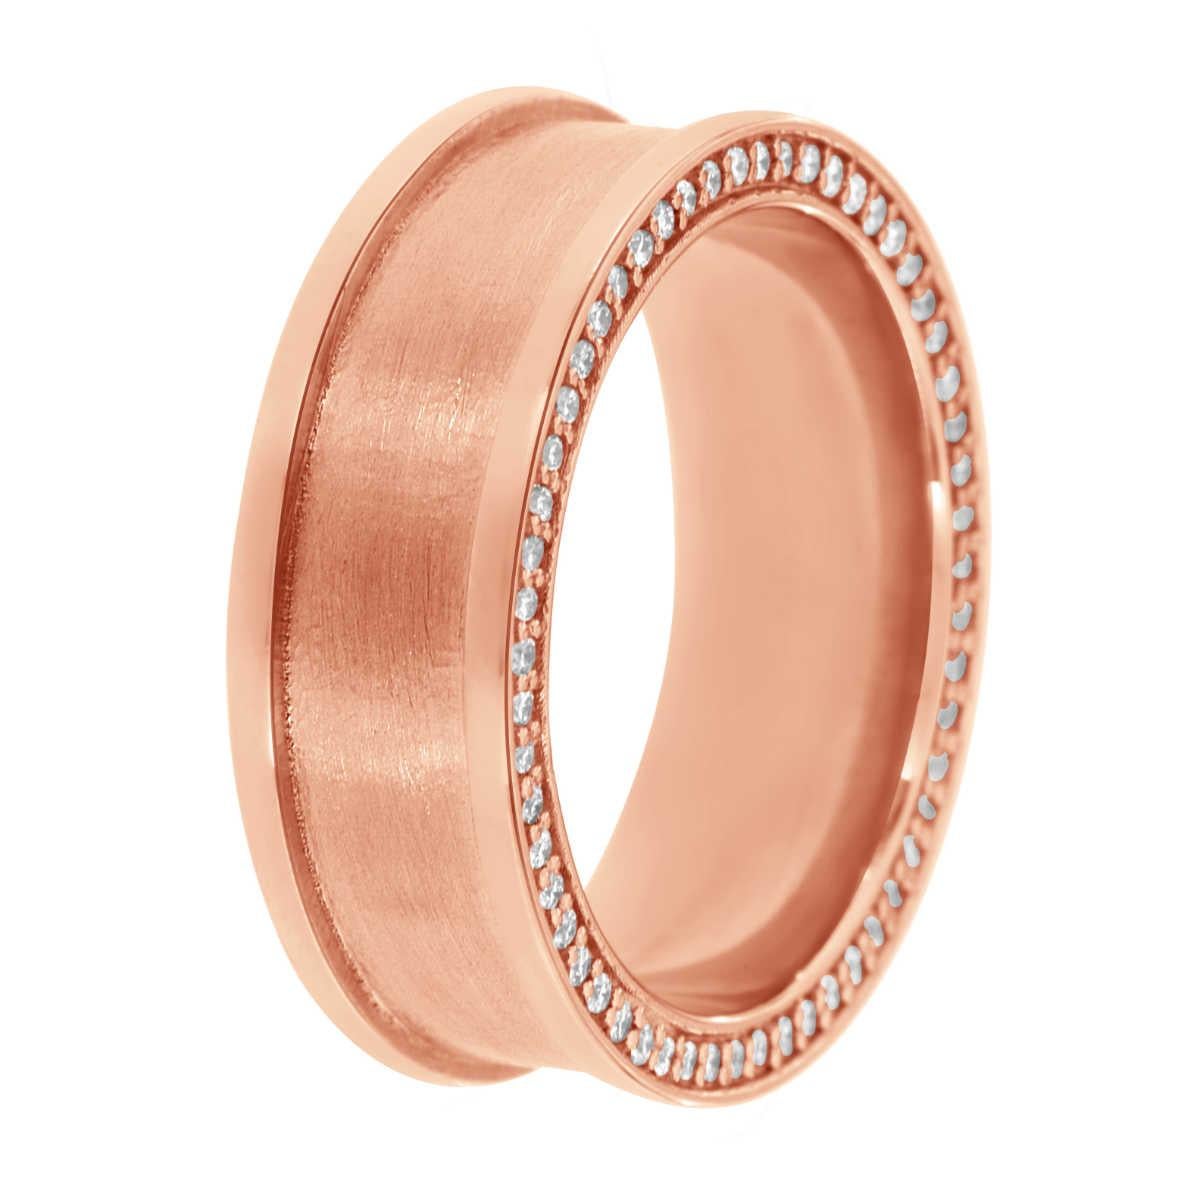 This 14k Rose gold eternity band features two rounds of brilliant round diamonds perfectly matched on each side of the tube. The band is 8 mm wide, 2 mm thick, and solid gold. The current finger size is 9. We can size it up to 10.5 but can not size